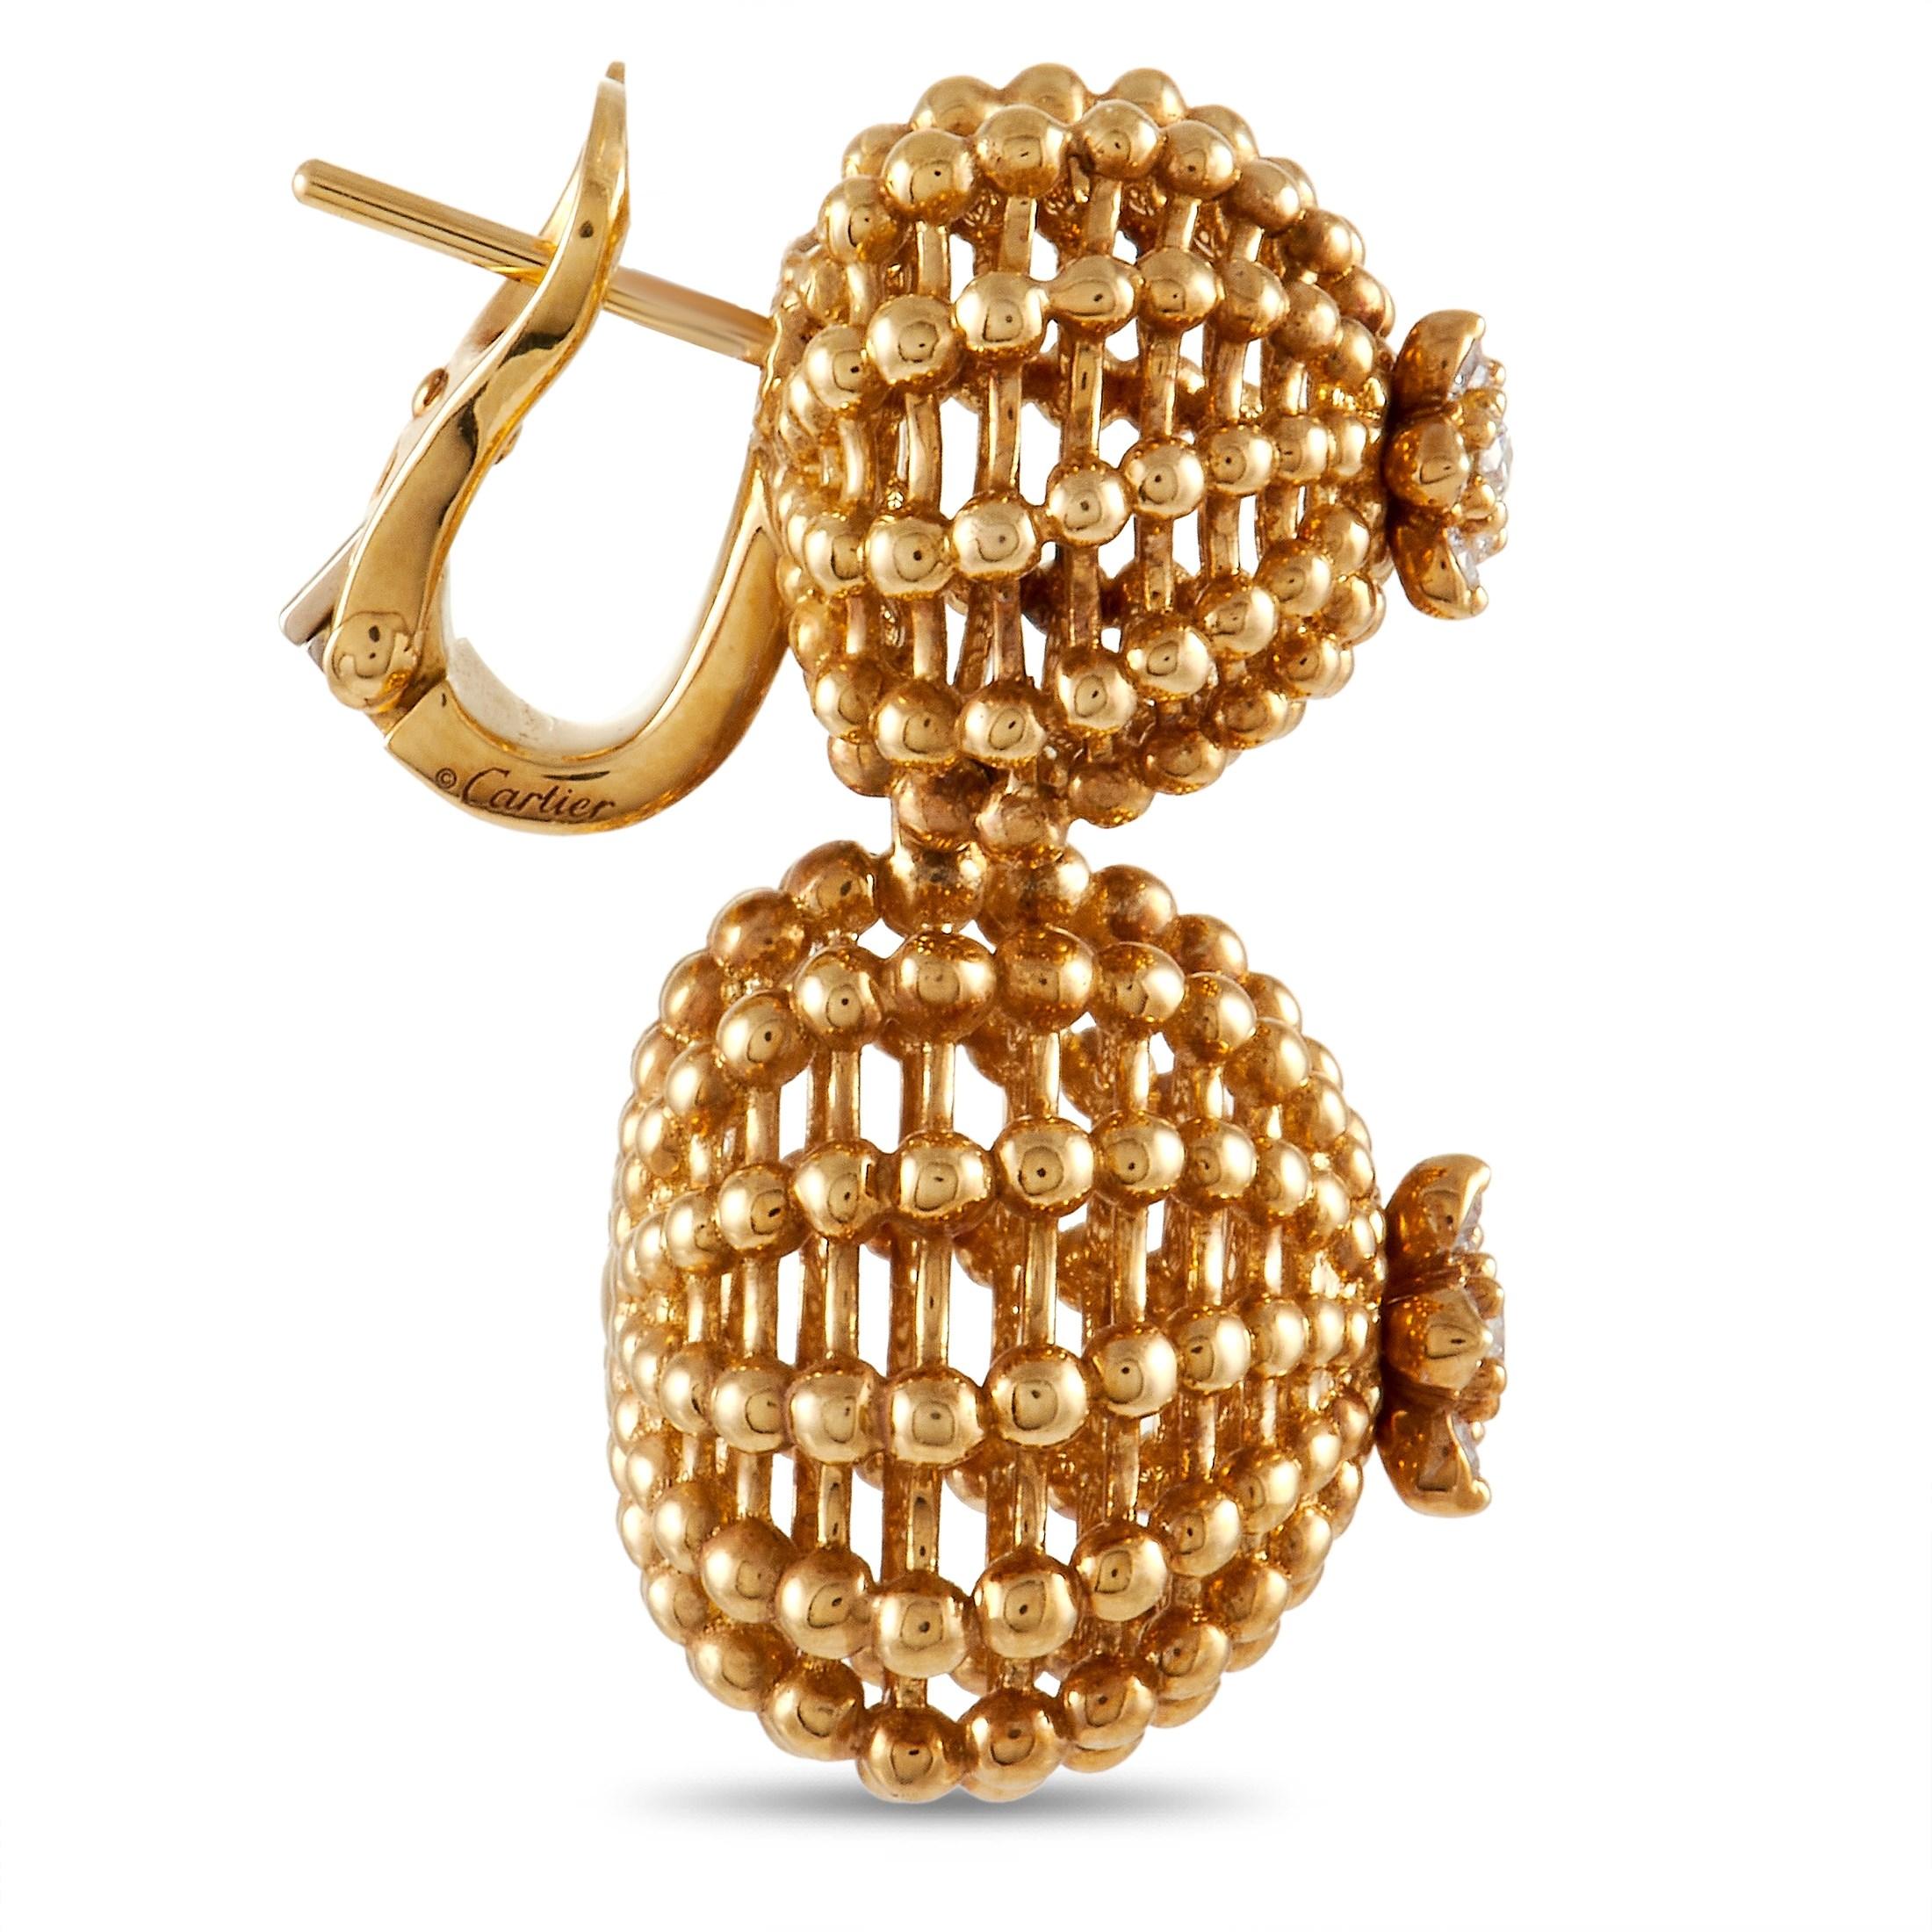 These earrings from the Cartier Cactus de Cartier collection feature incredible attention to detail. Each textured setting is crafted from luxurious 18K Yellow Gold and measures 1” long by .5” wide. Their striking form also highlights the elegant